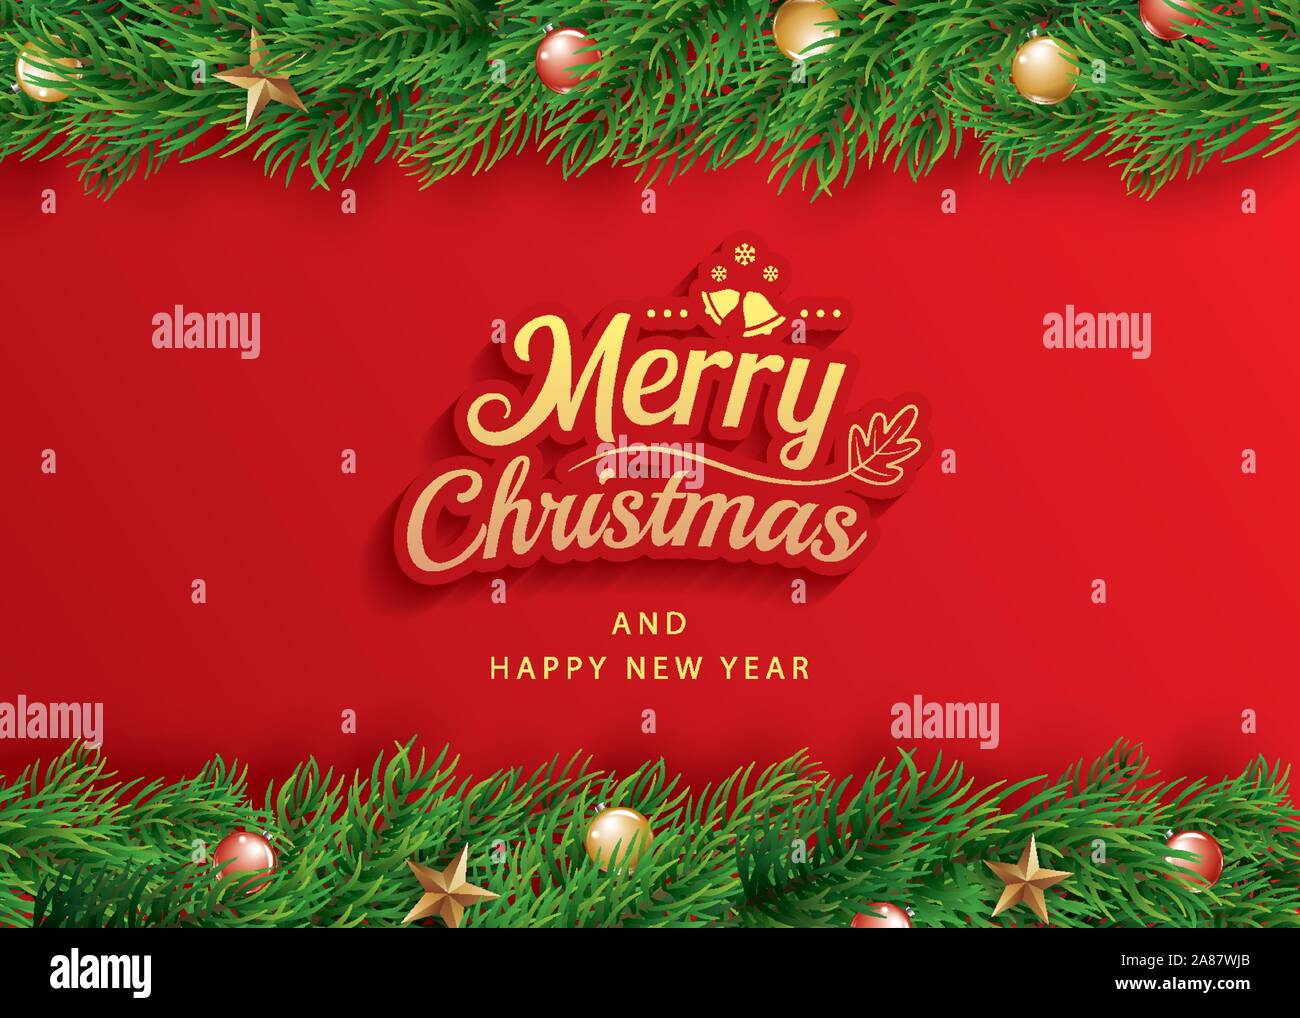 Merry Christmas And Happy New Year Greeting Card Banner Template